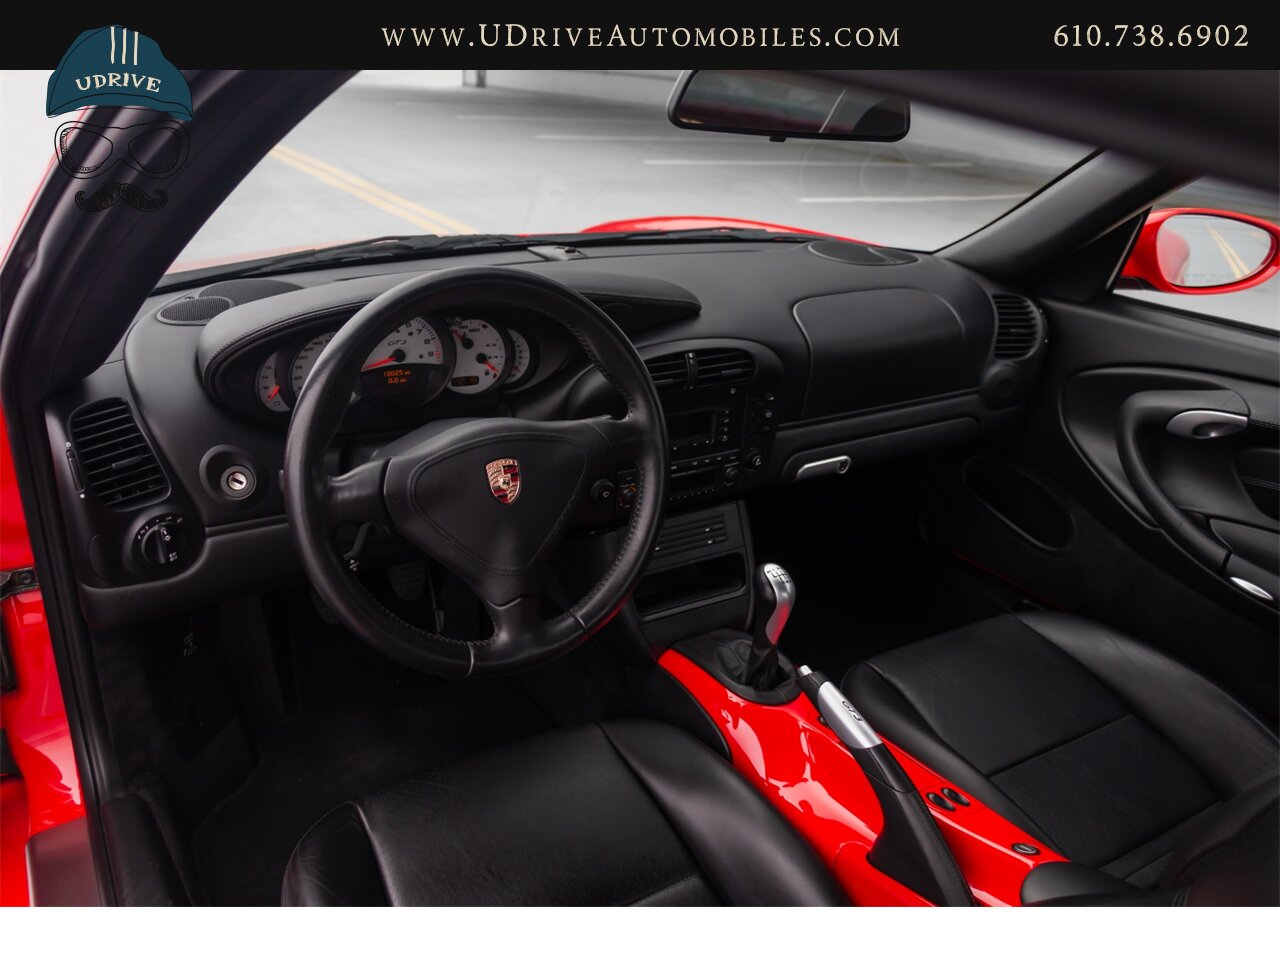 2004 Porsche 911 996 GT3 Guards Red Sport Seats Painted Hardbacks  Painted Center Console 18k Miles - Photo 8 - West Chester, PA 19382